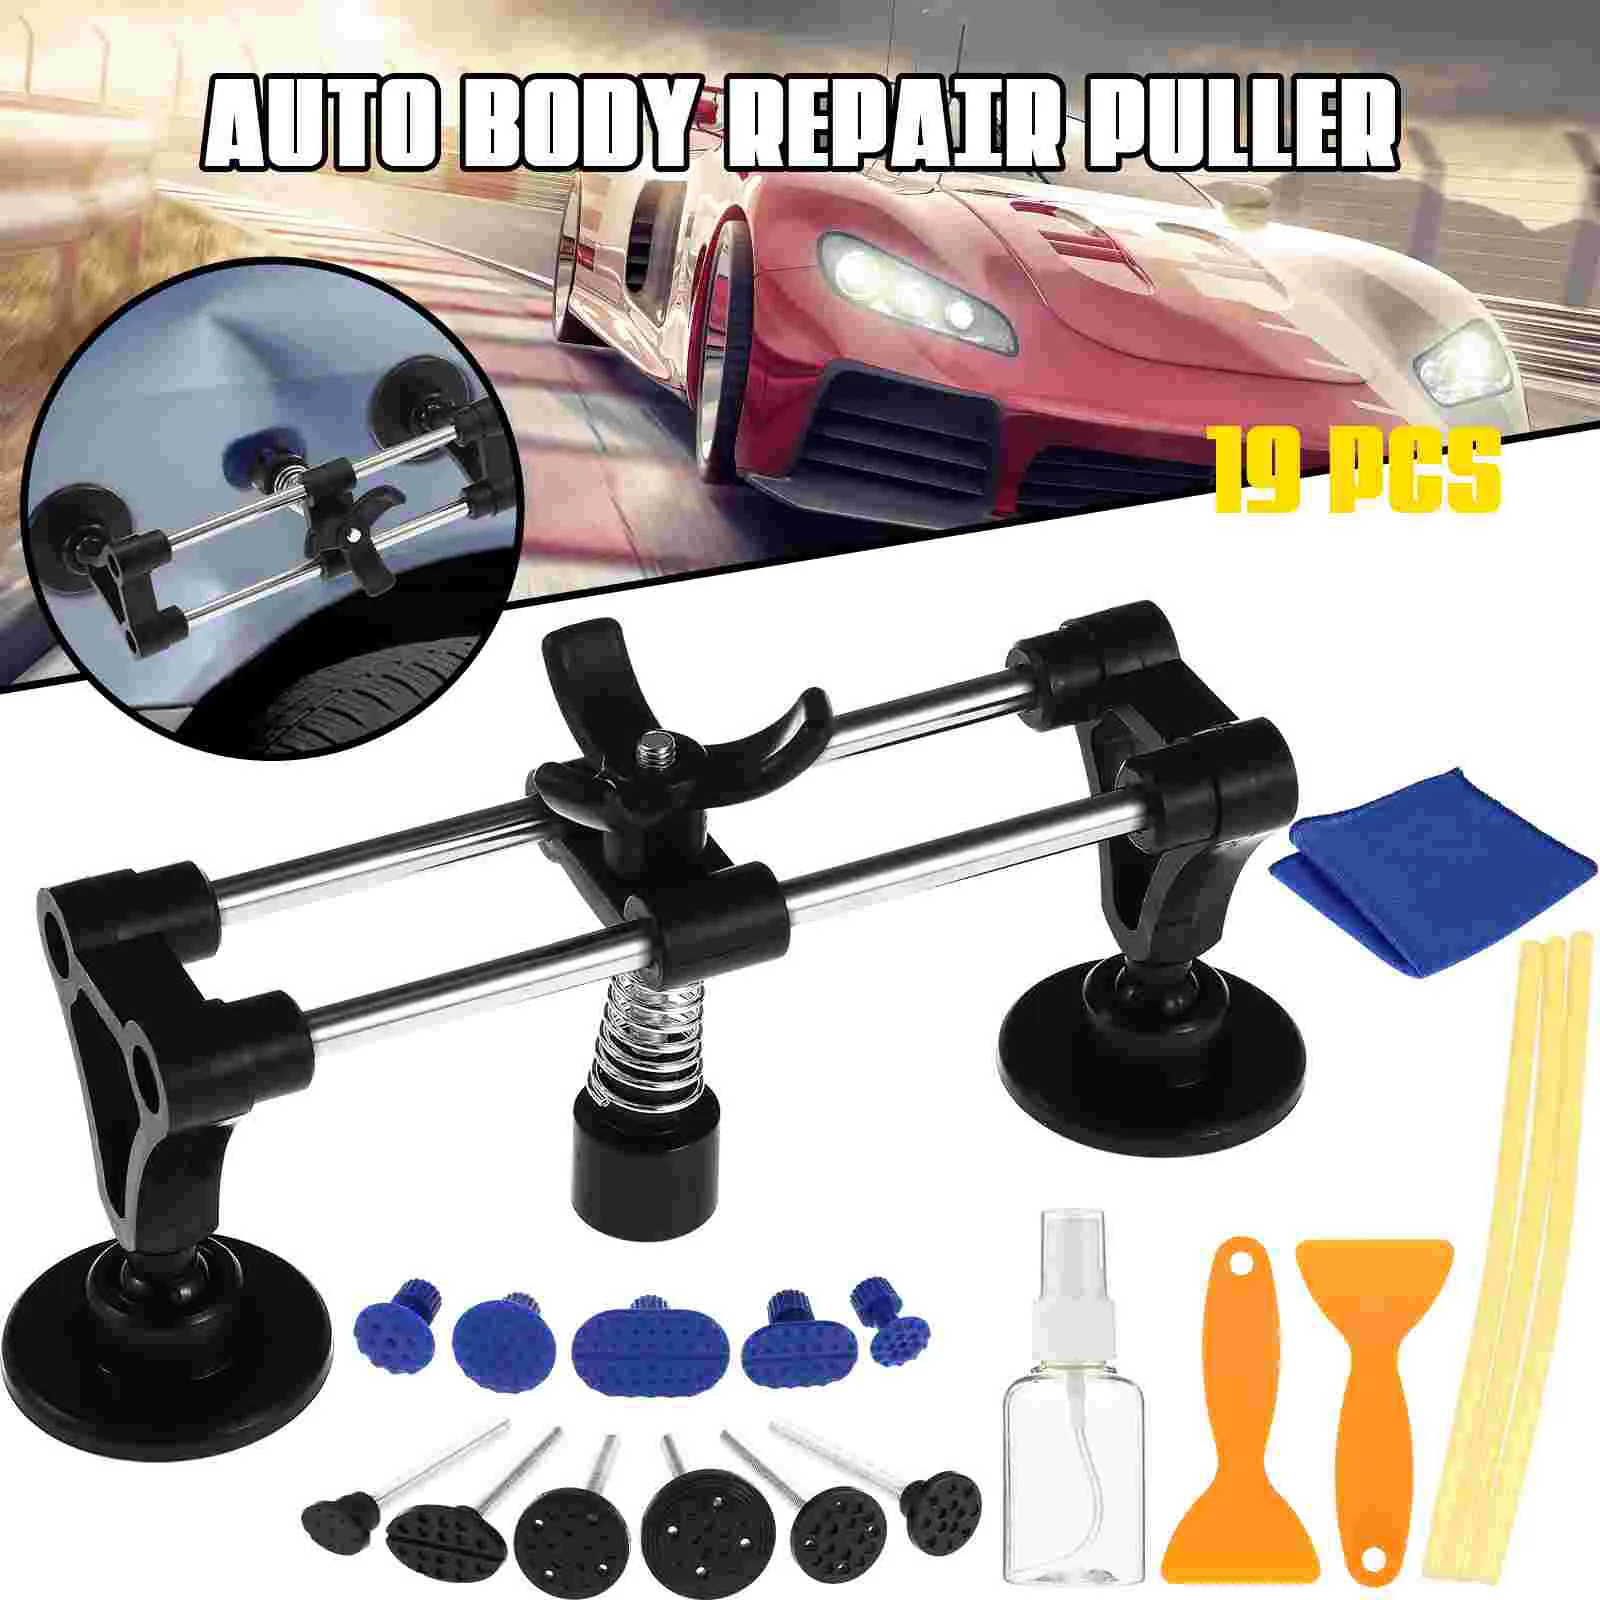 

Auto Body Dent Puller Kit Double Pole Bridge Puller with Puller Tabs Powerfully Pops Car Dents and Other Metal Surface Dents